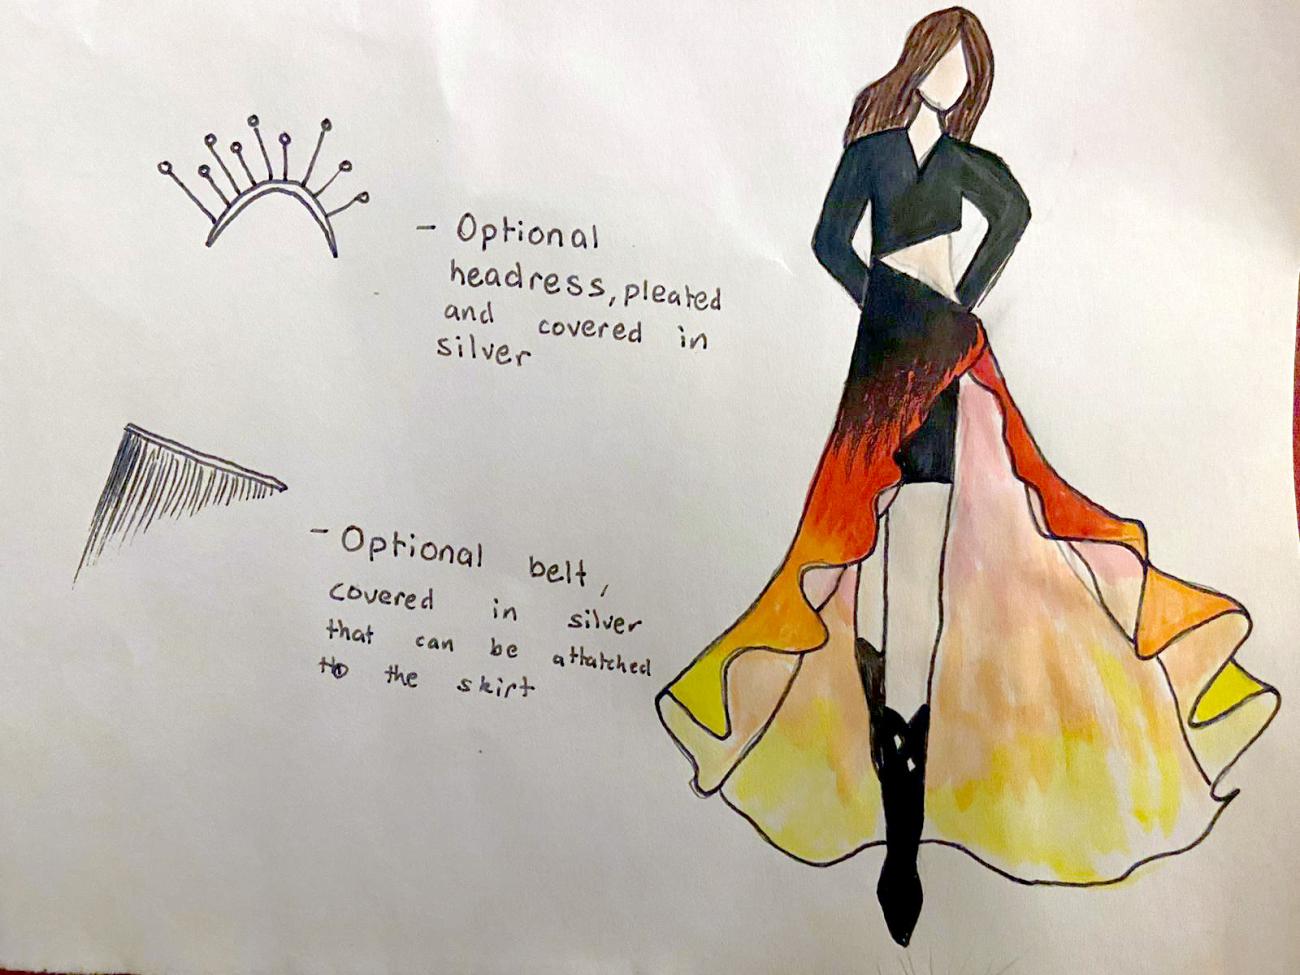 An illustration of a woman wearing a black dress with yellow, orange and red skirt that looks like flames